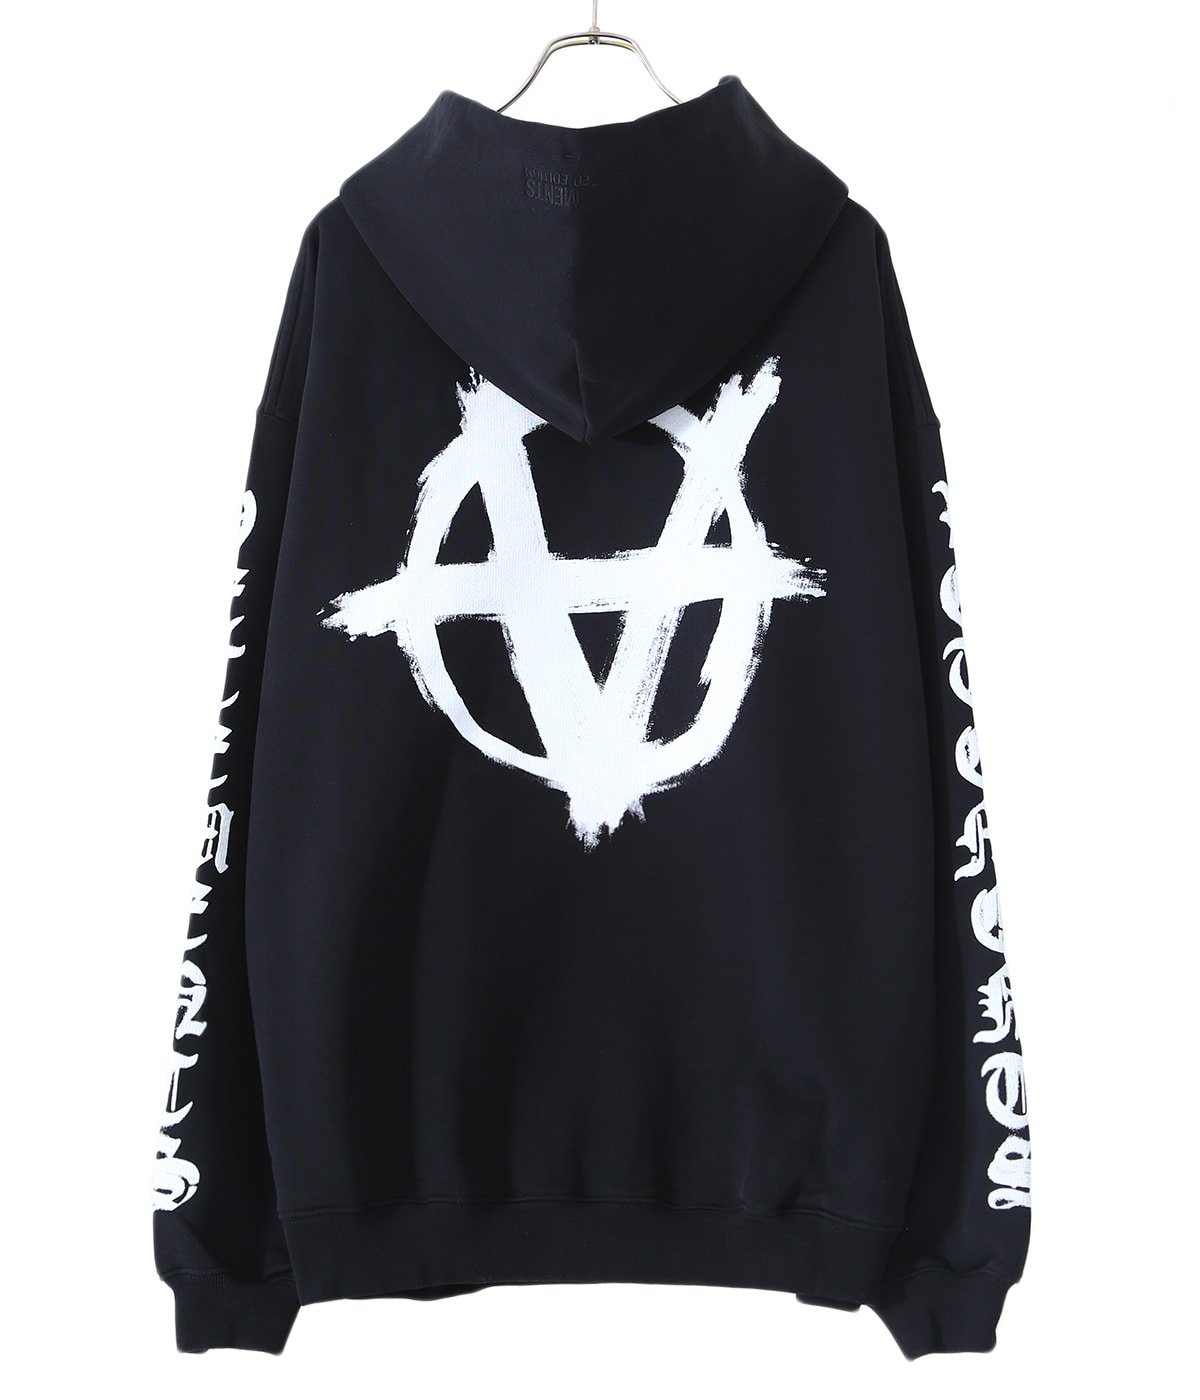 DOUBLE ANARCHY LOGO HOODIE